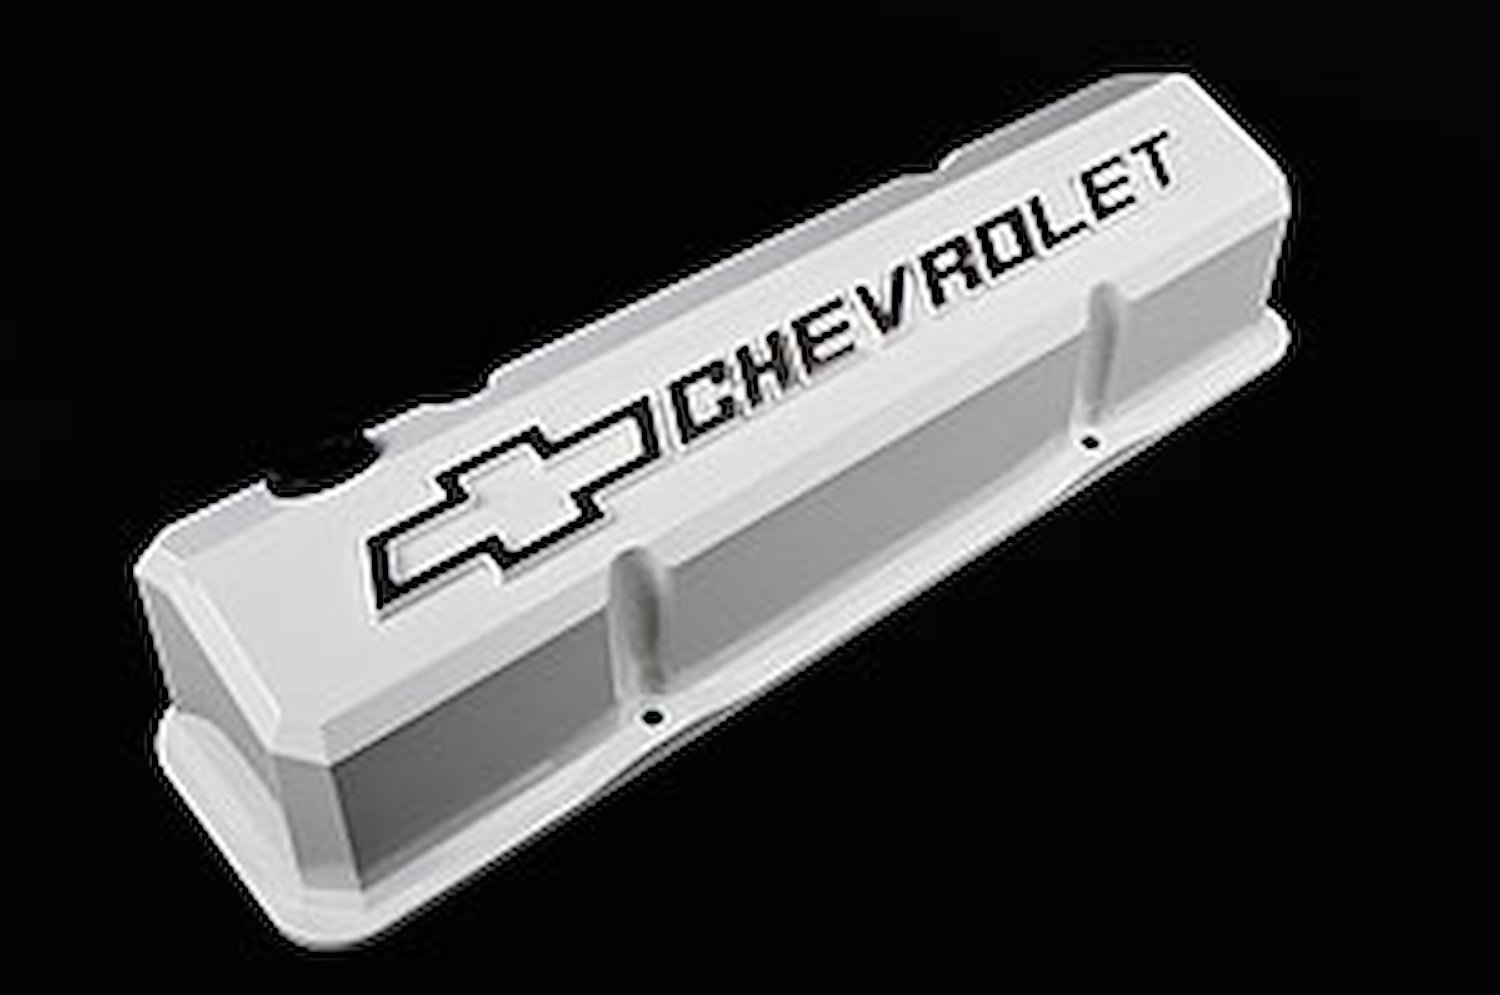 Die-Cast Slant-Edge Valve Covers for 1958-1986 Small Block Chevy with Chevrolet/Bowtie Raised Emblem in White Finish